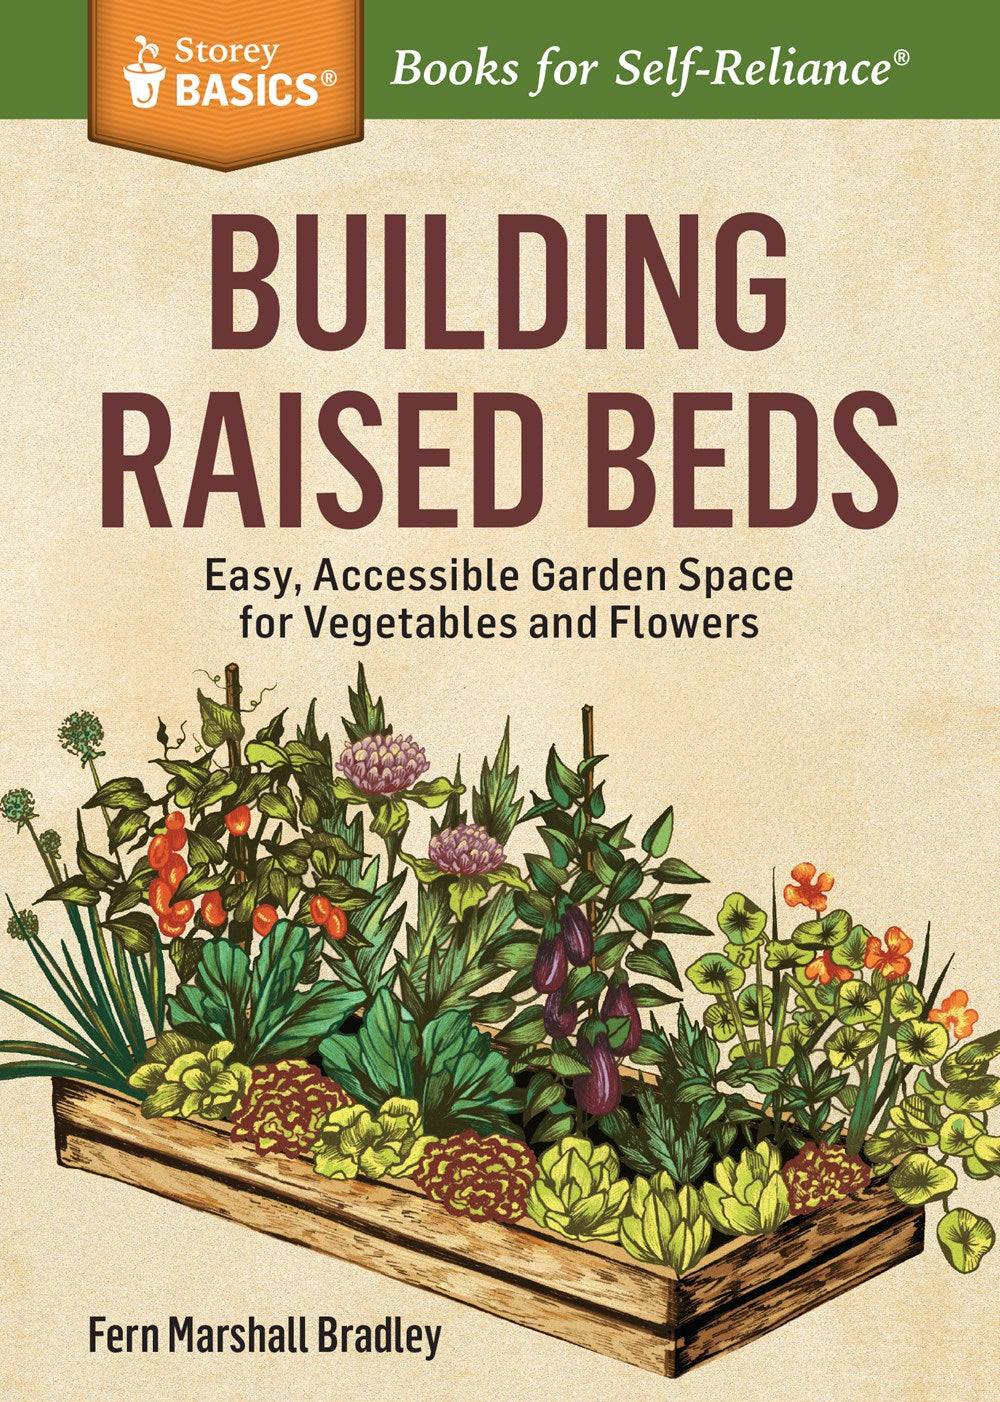 Book:  Building Raised Beds